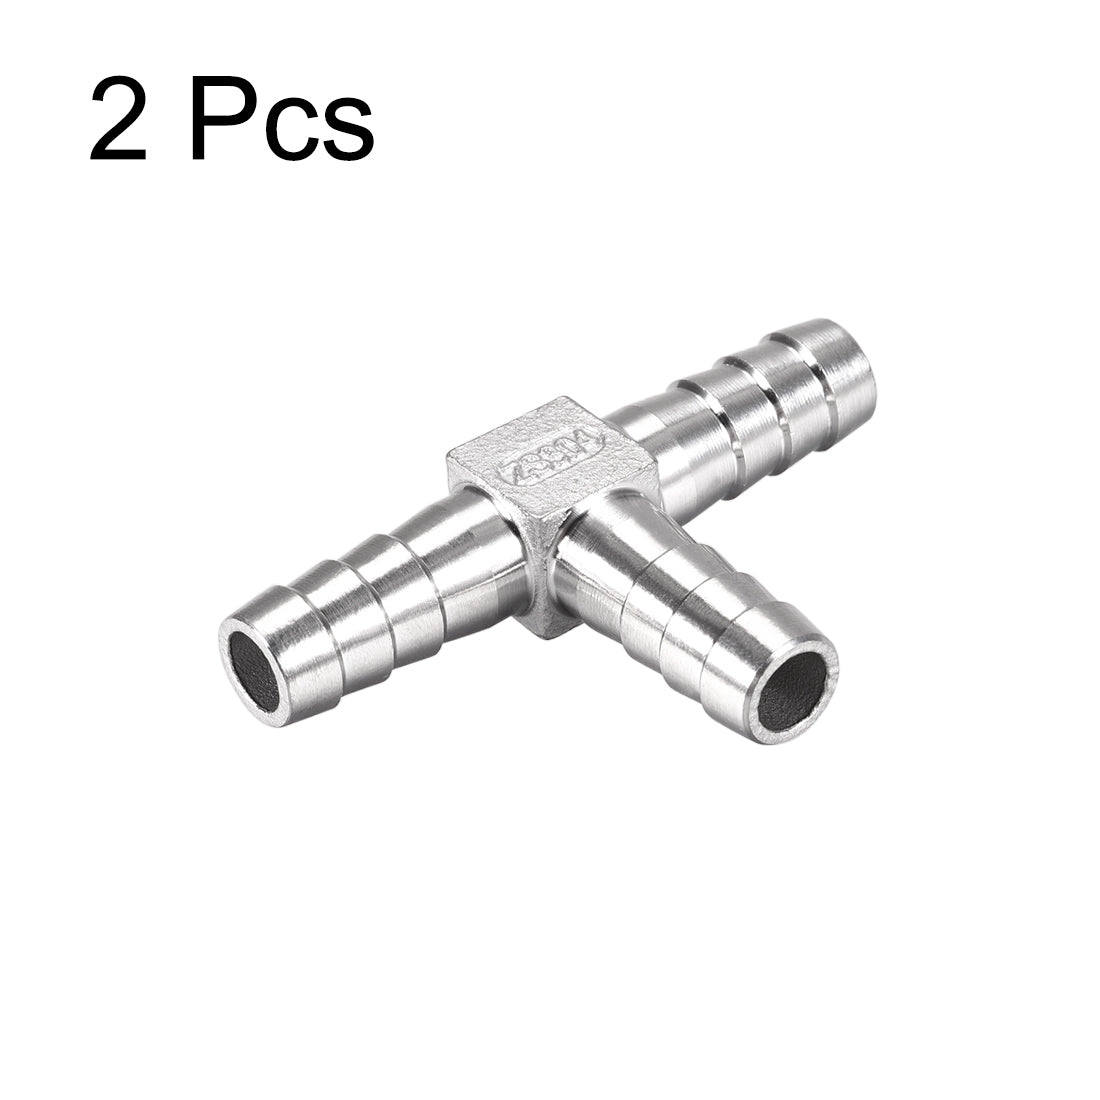 uxcell Uxcell 15/32-Inch (12mm) Hose ID Barb Fitting Stainless Steel 3 Way T-Shaped Union Home Brew Fitting 2pcs